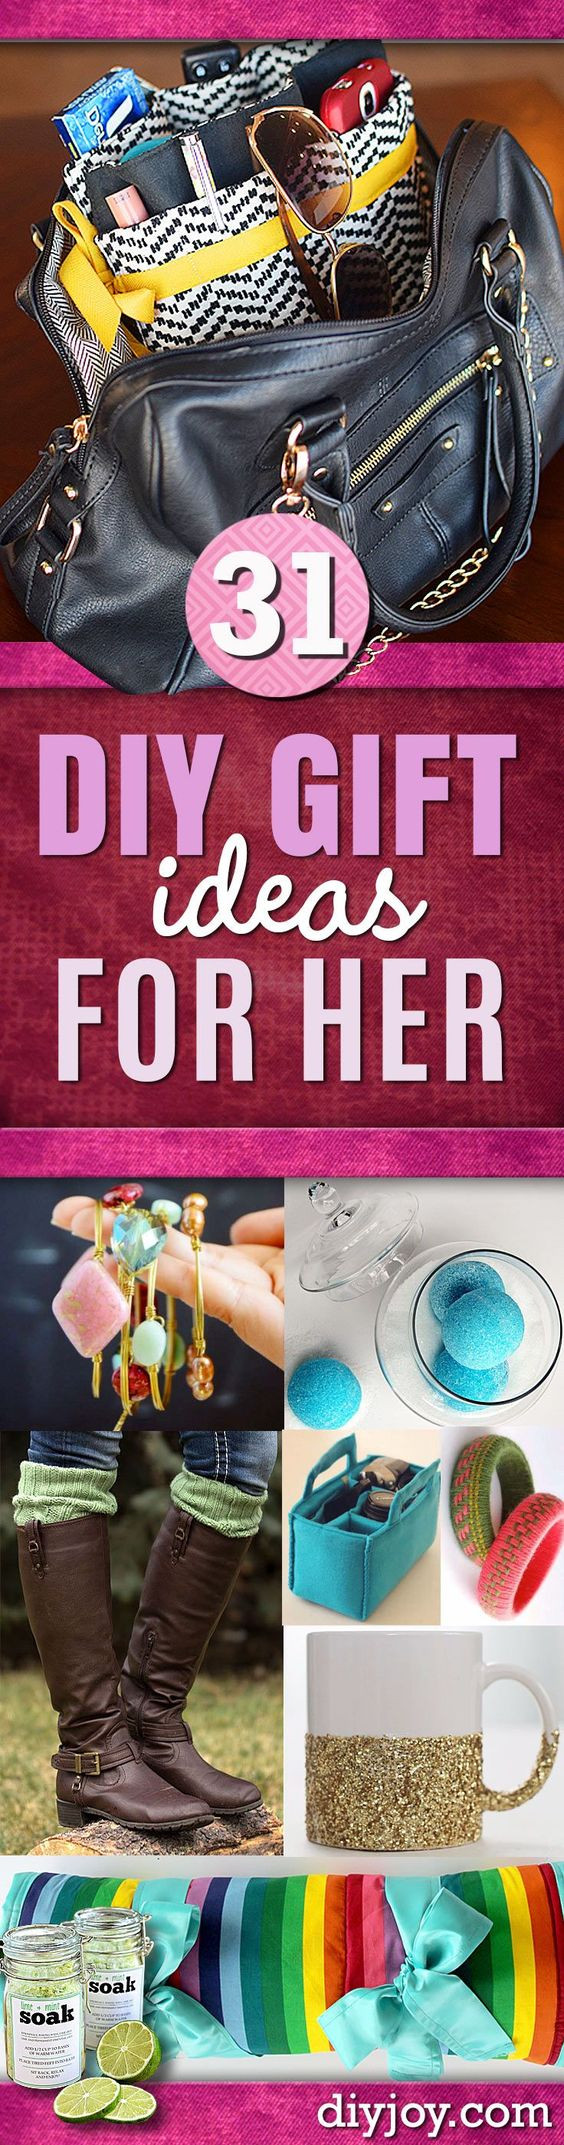 Homemade Gift Ideas For Girlfriend
 Super Special DIY Gift Ideas for Her